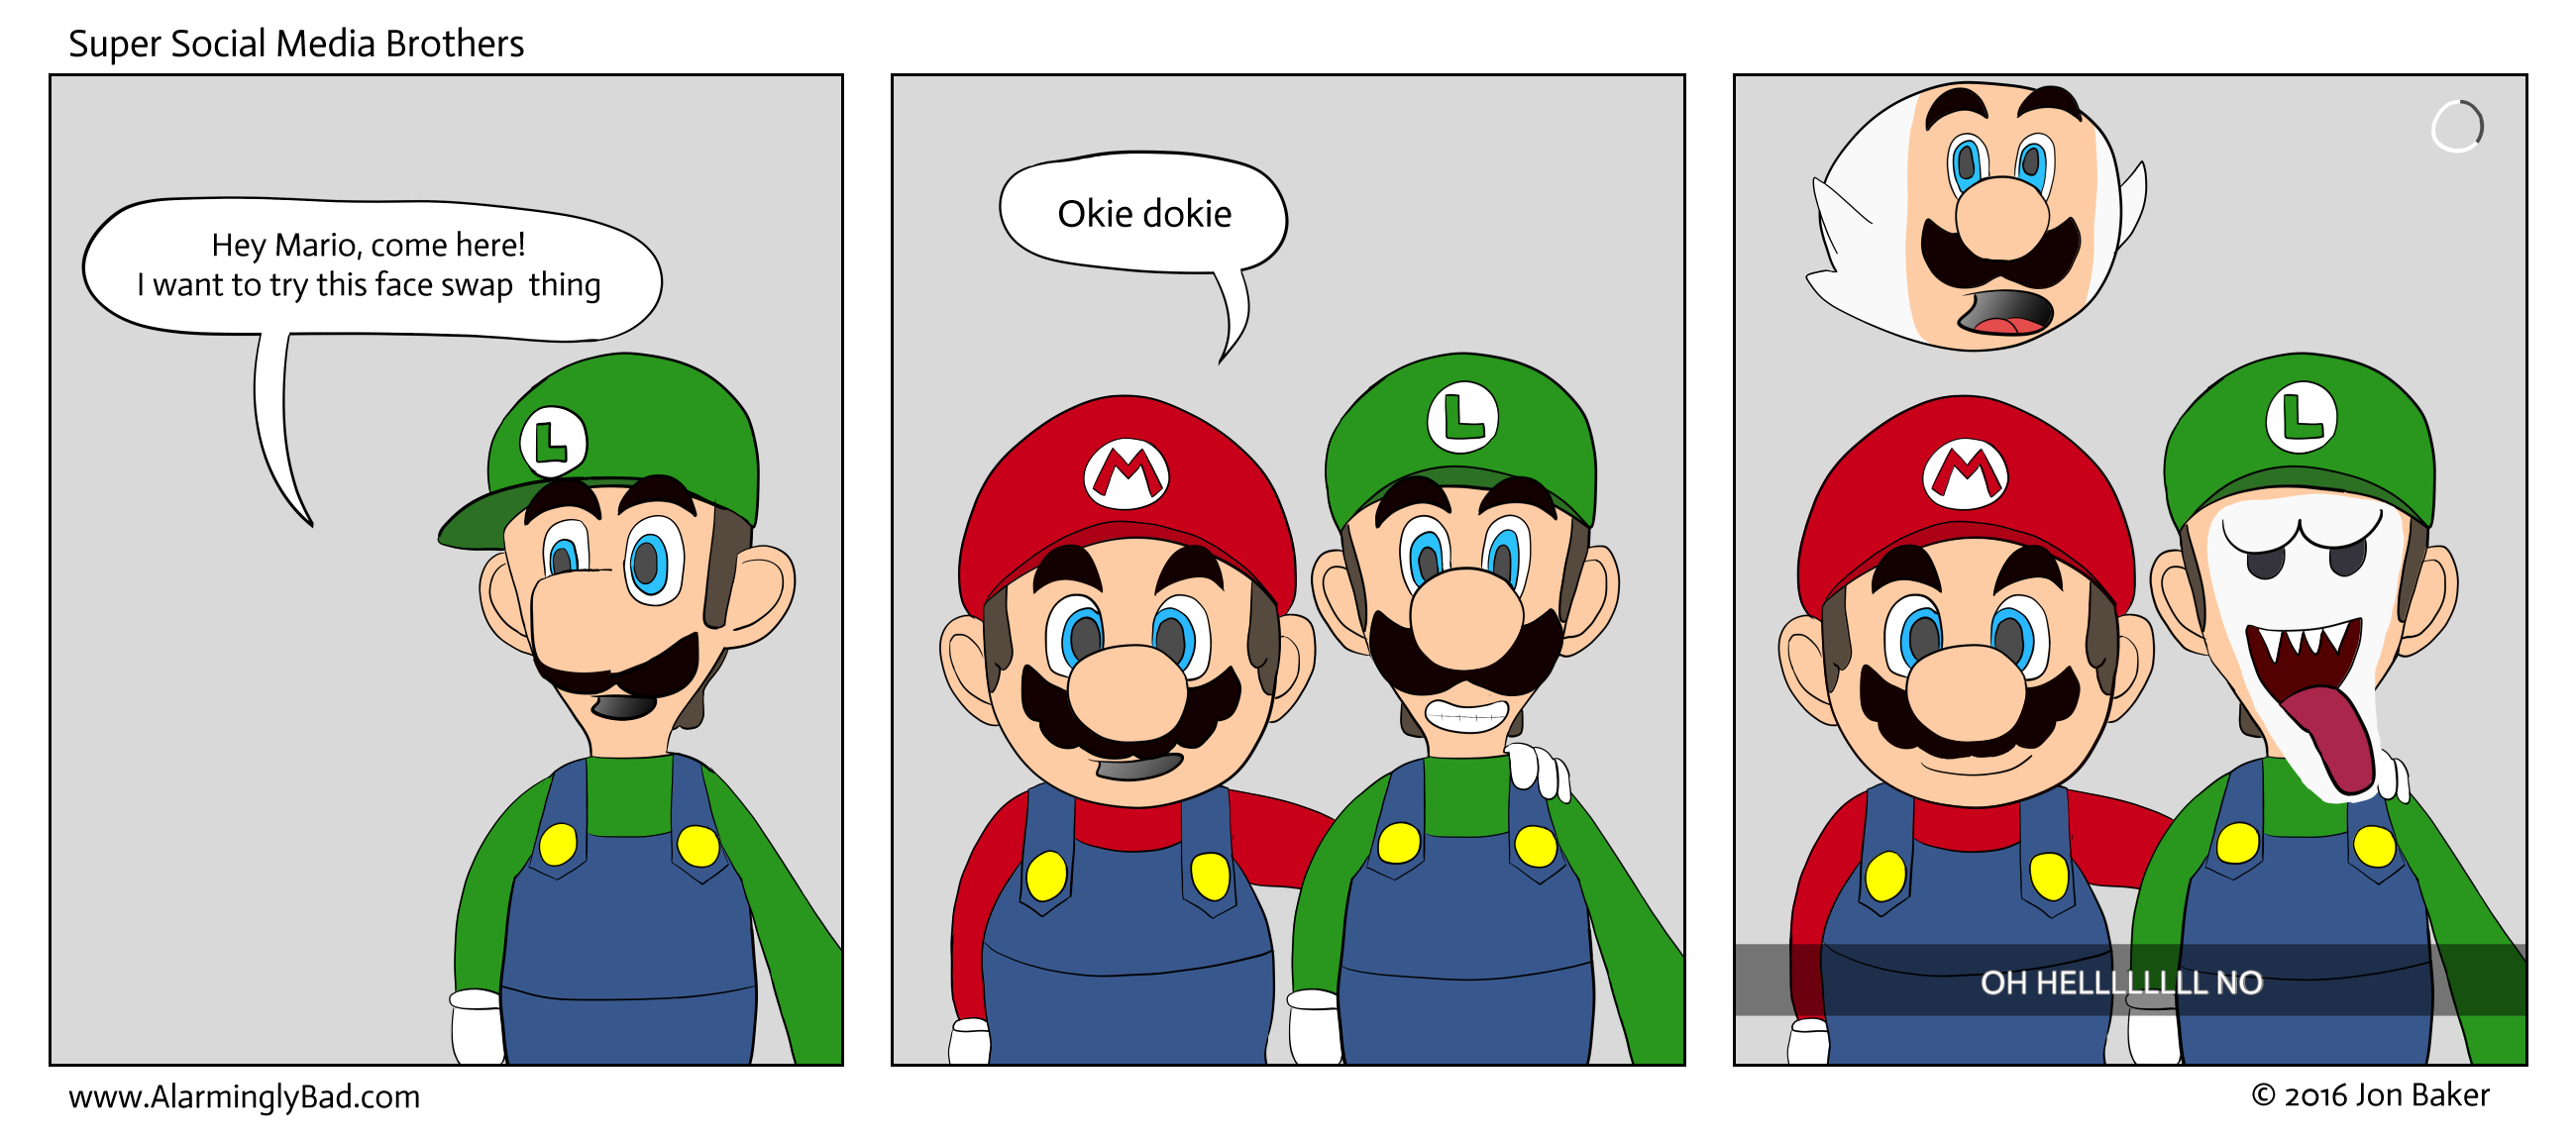 Is this why Luigi's such a scaredy cat?